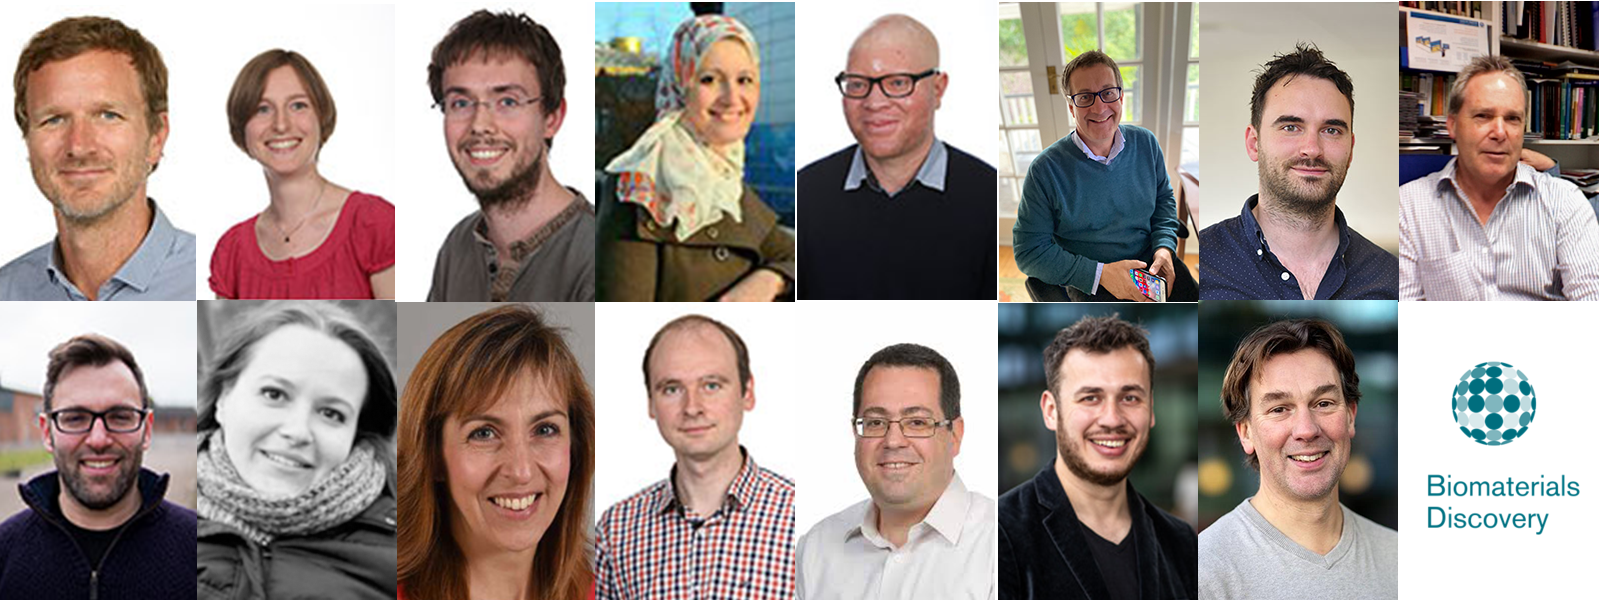 Images of the 15 blog authors